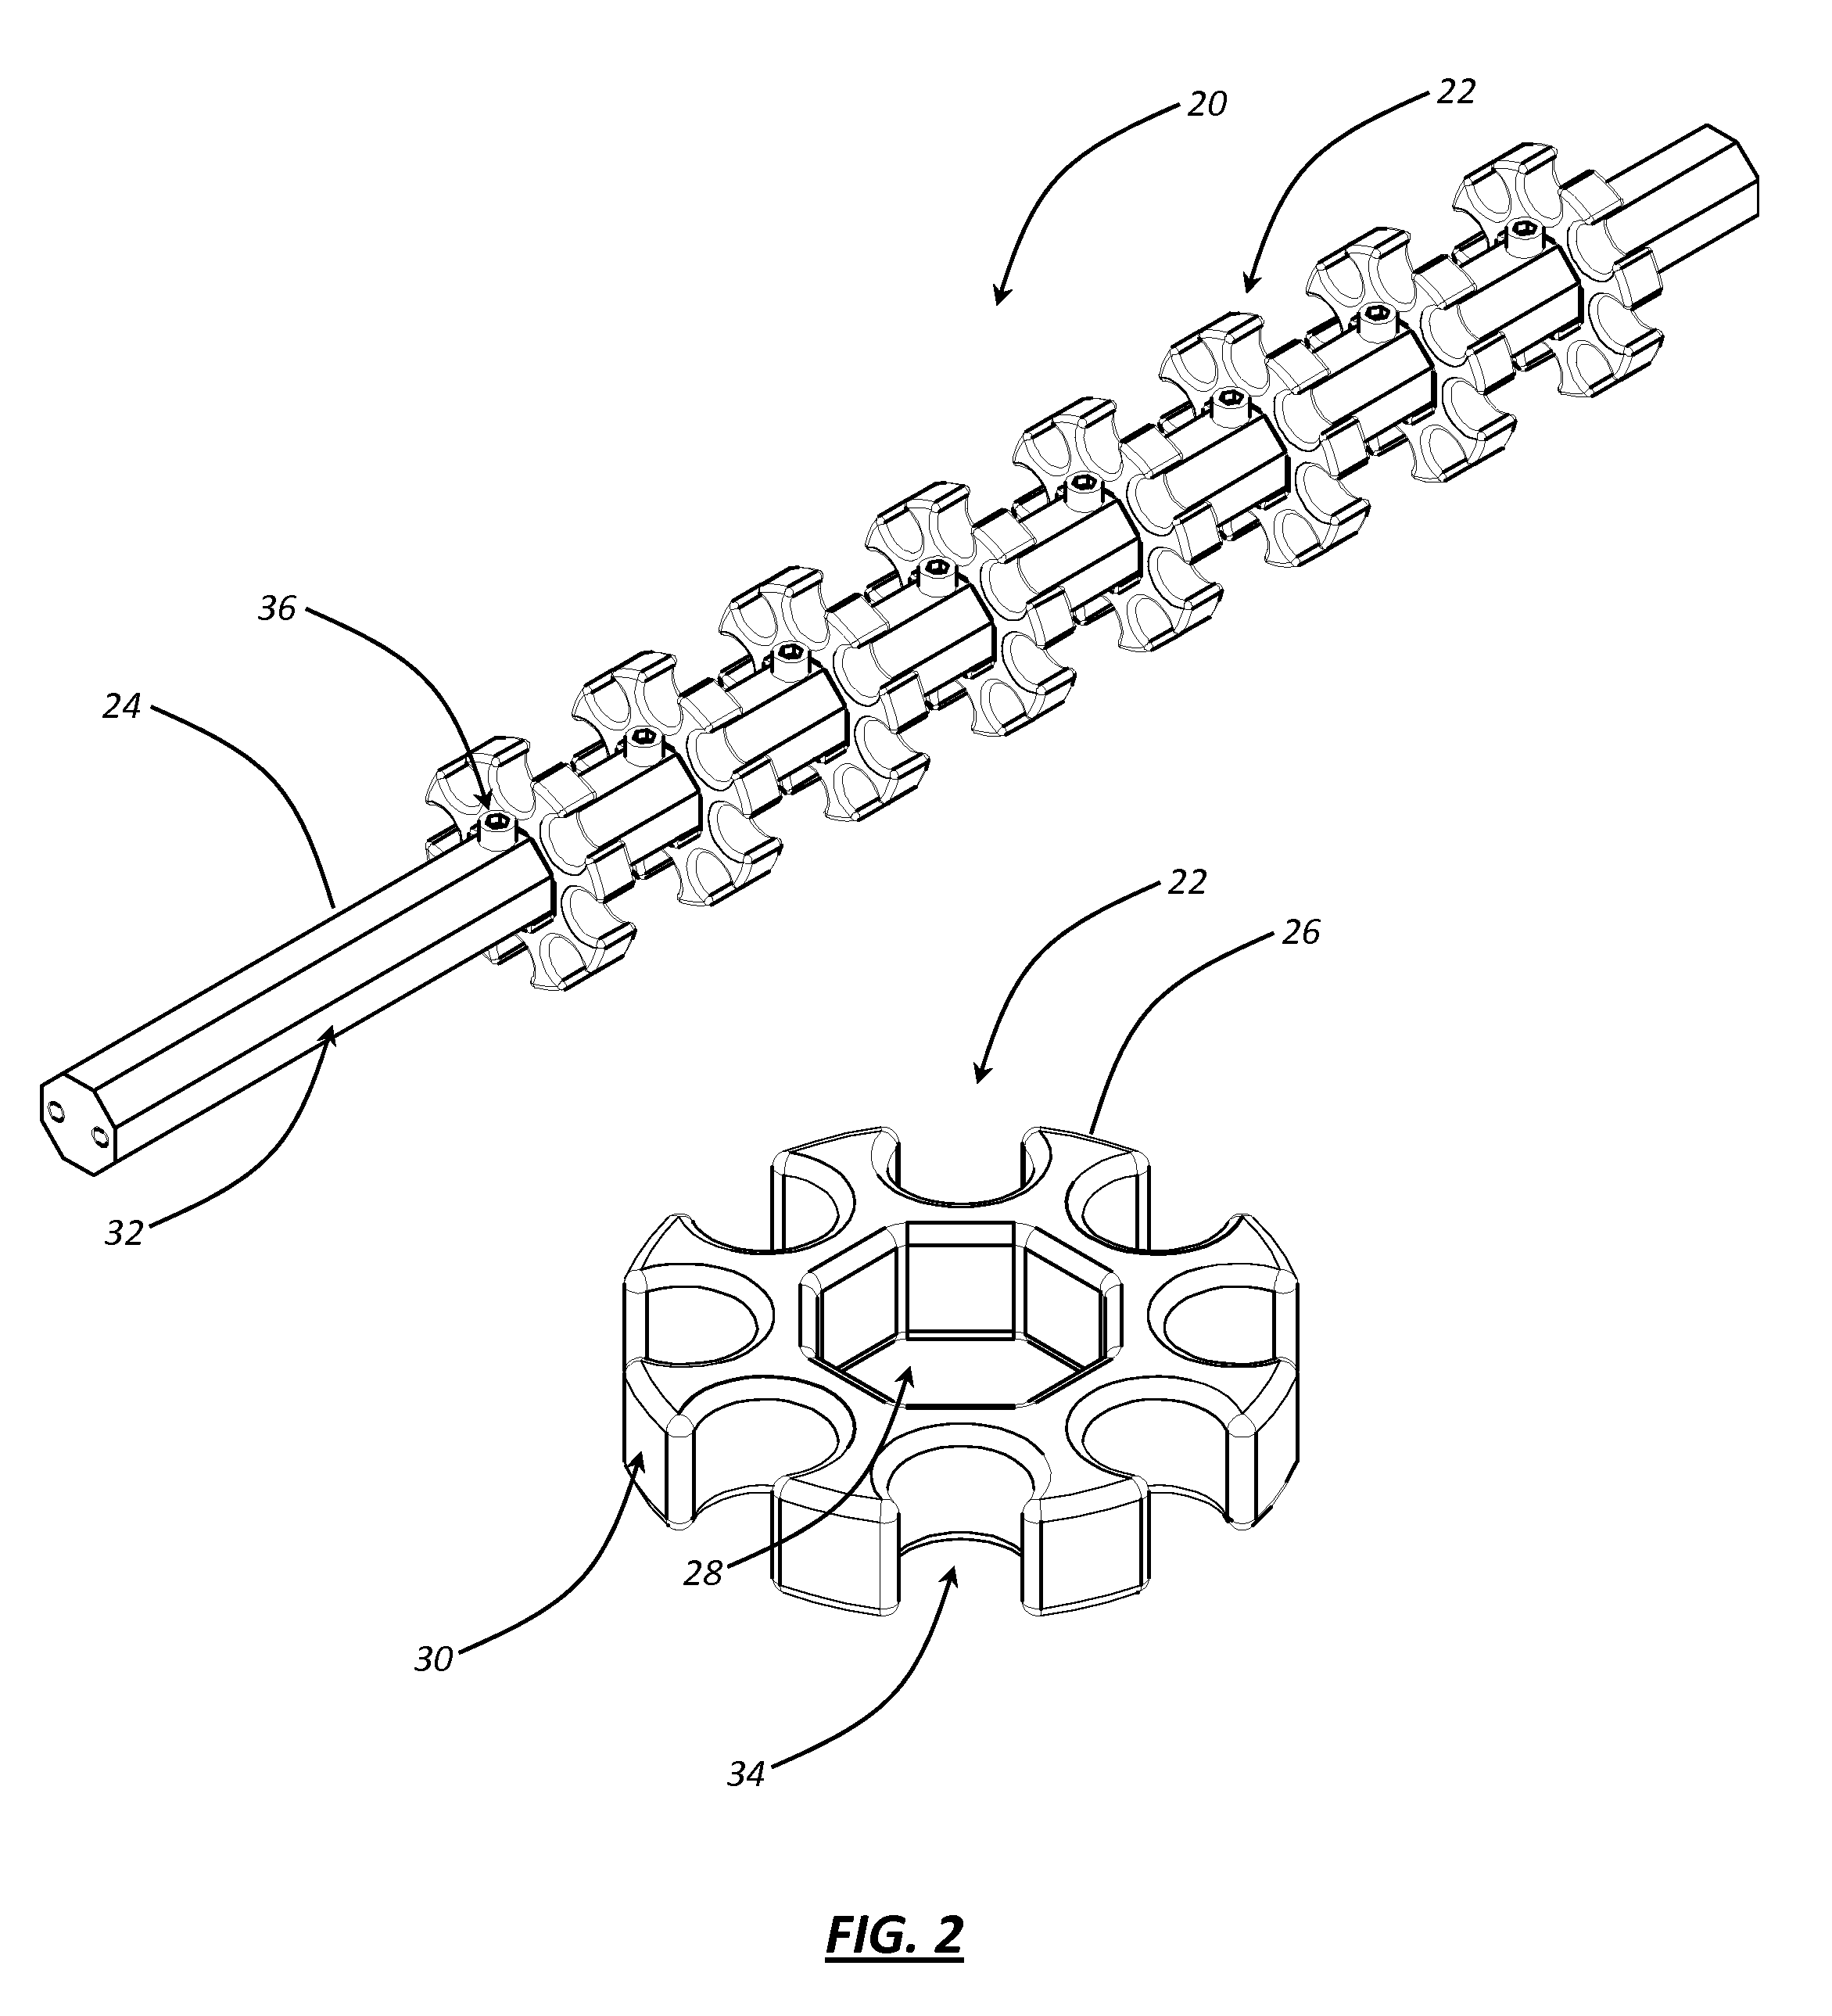 Routing assembly for wires in electronic assemblies and the like